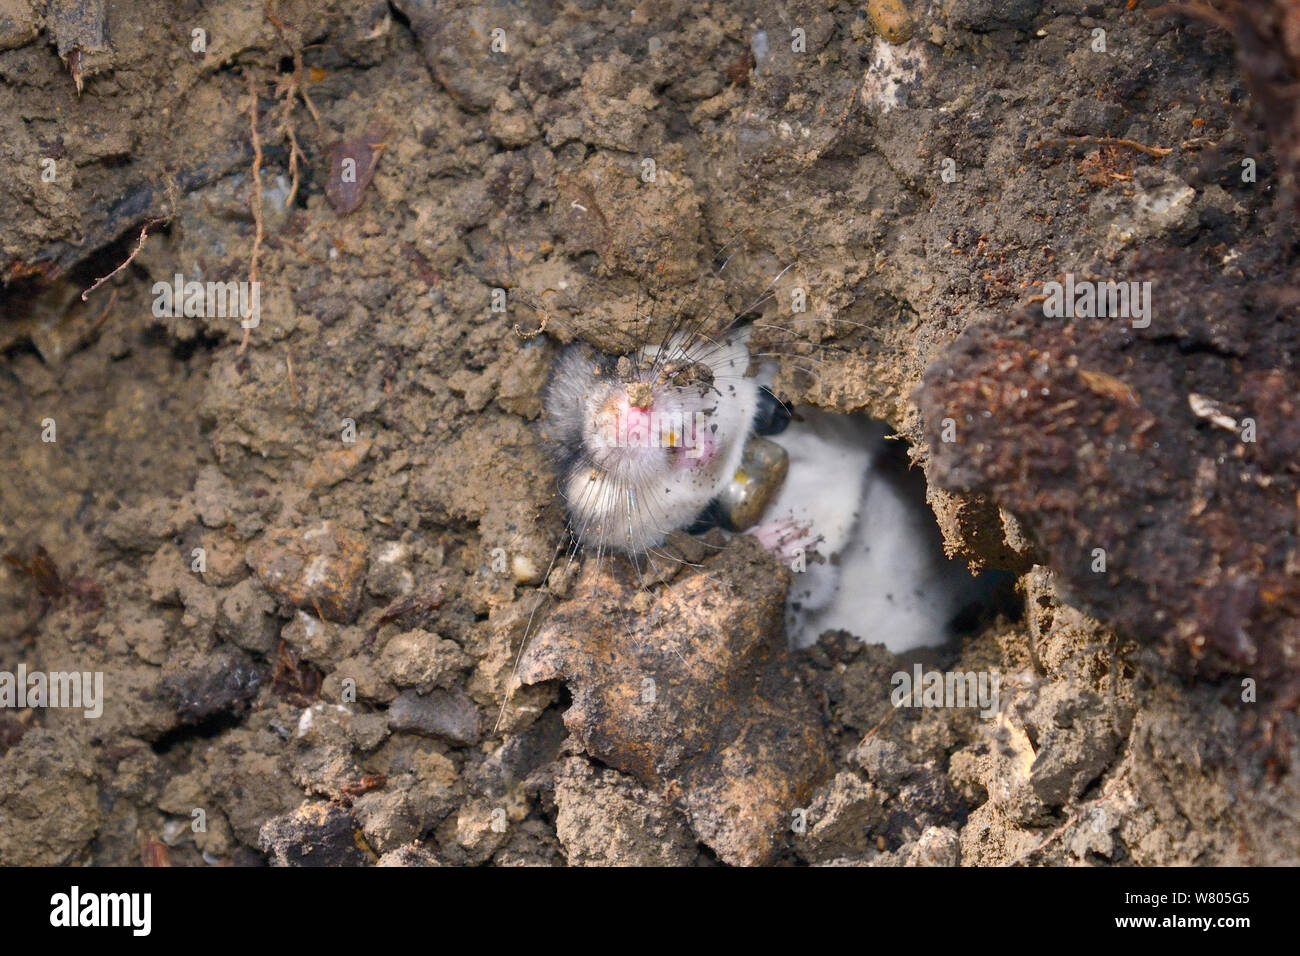 Radio-collared Edible / Fat Dormouse (Glis glis) in its winter hibernation burrow, excavated during a survey in woodland where this European species has become naturalised, Buckinghamshire, UK, April. Stock Photo